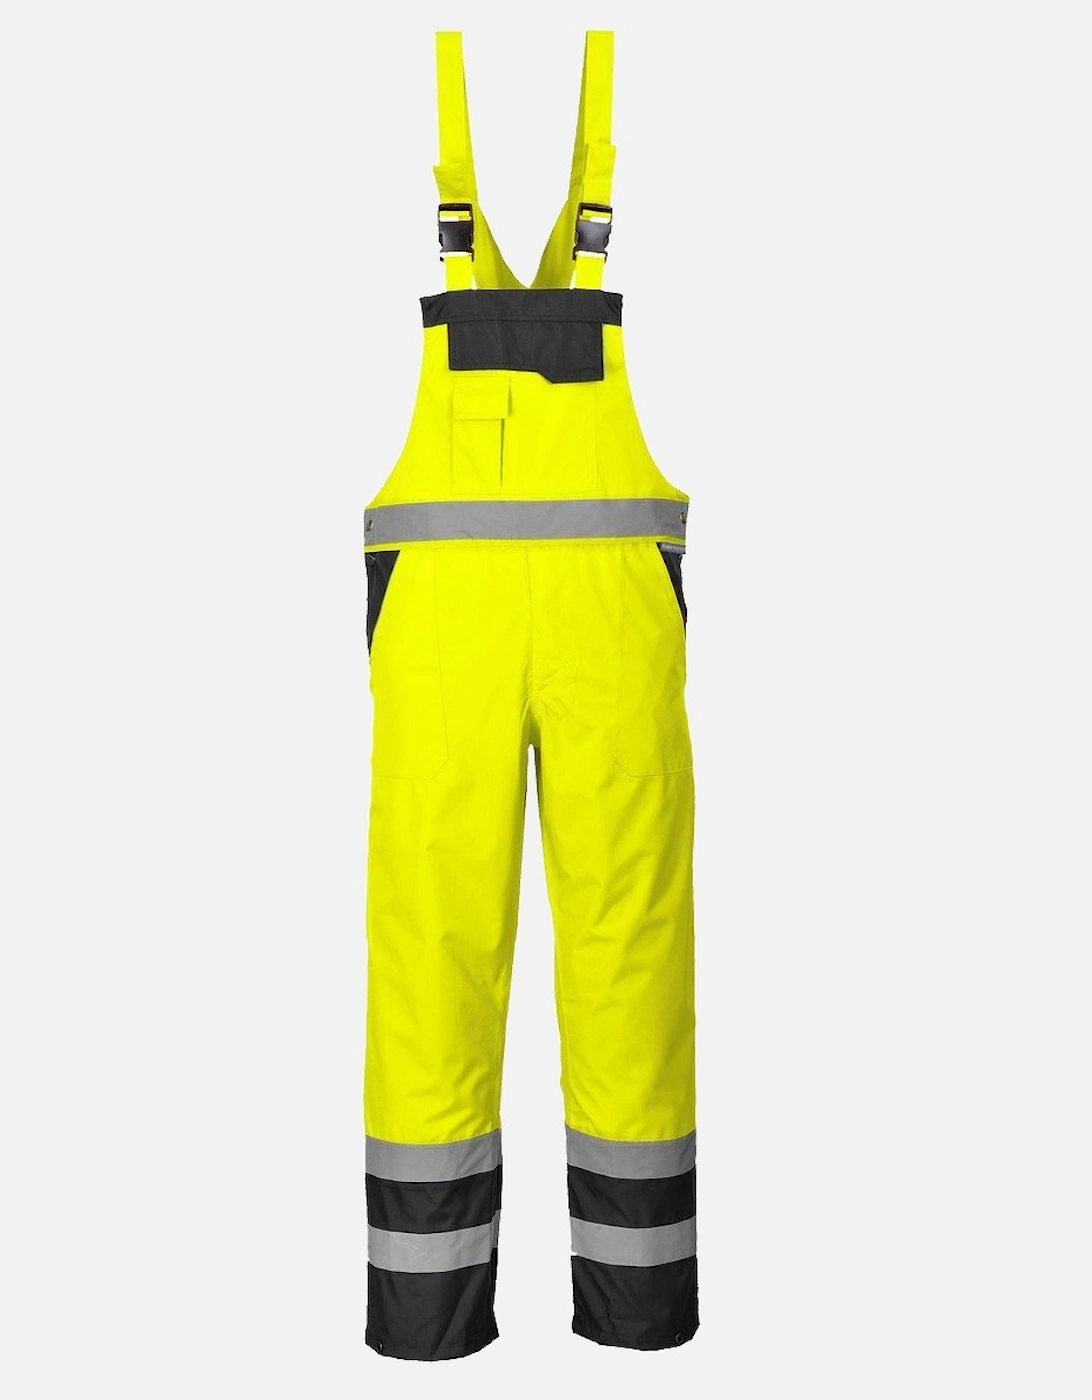 Portwest Unisex Contrast Hi Vis Bib And Brace Coveralls - Unlined (S488) / Workwear (Pack of 2) - Yellow/ Navy